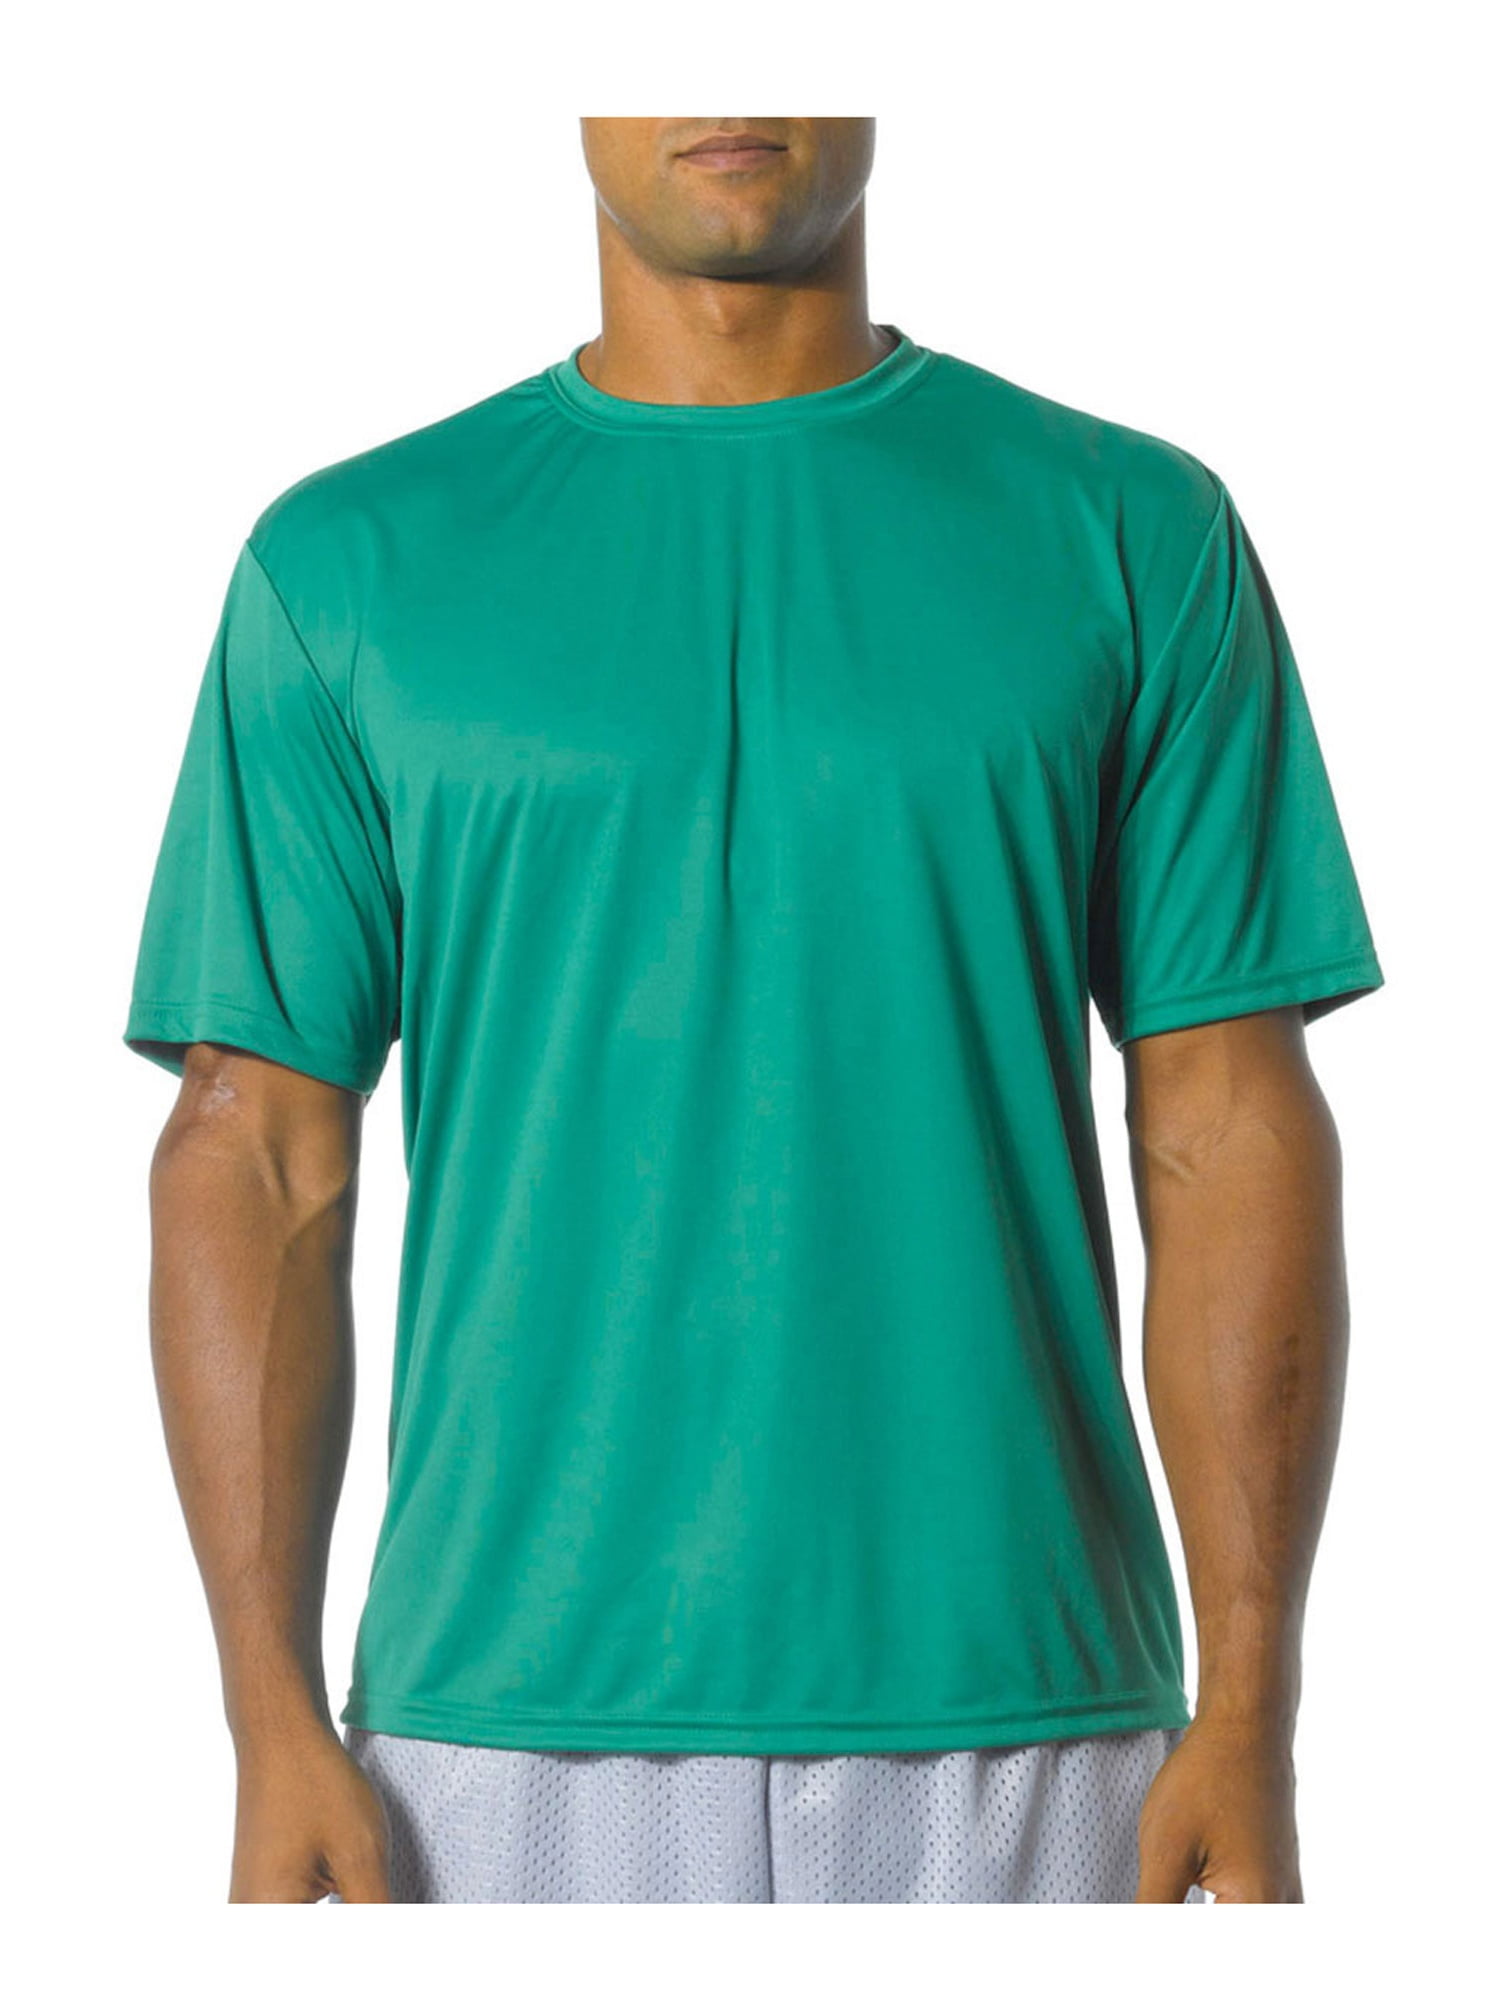 A4 - Men's Moisture Wicking Cooling Performance T-Shirt, Style N3142 ...